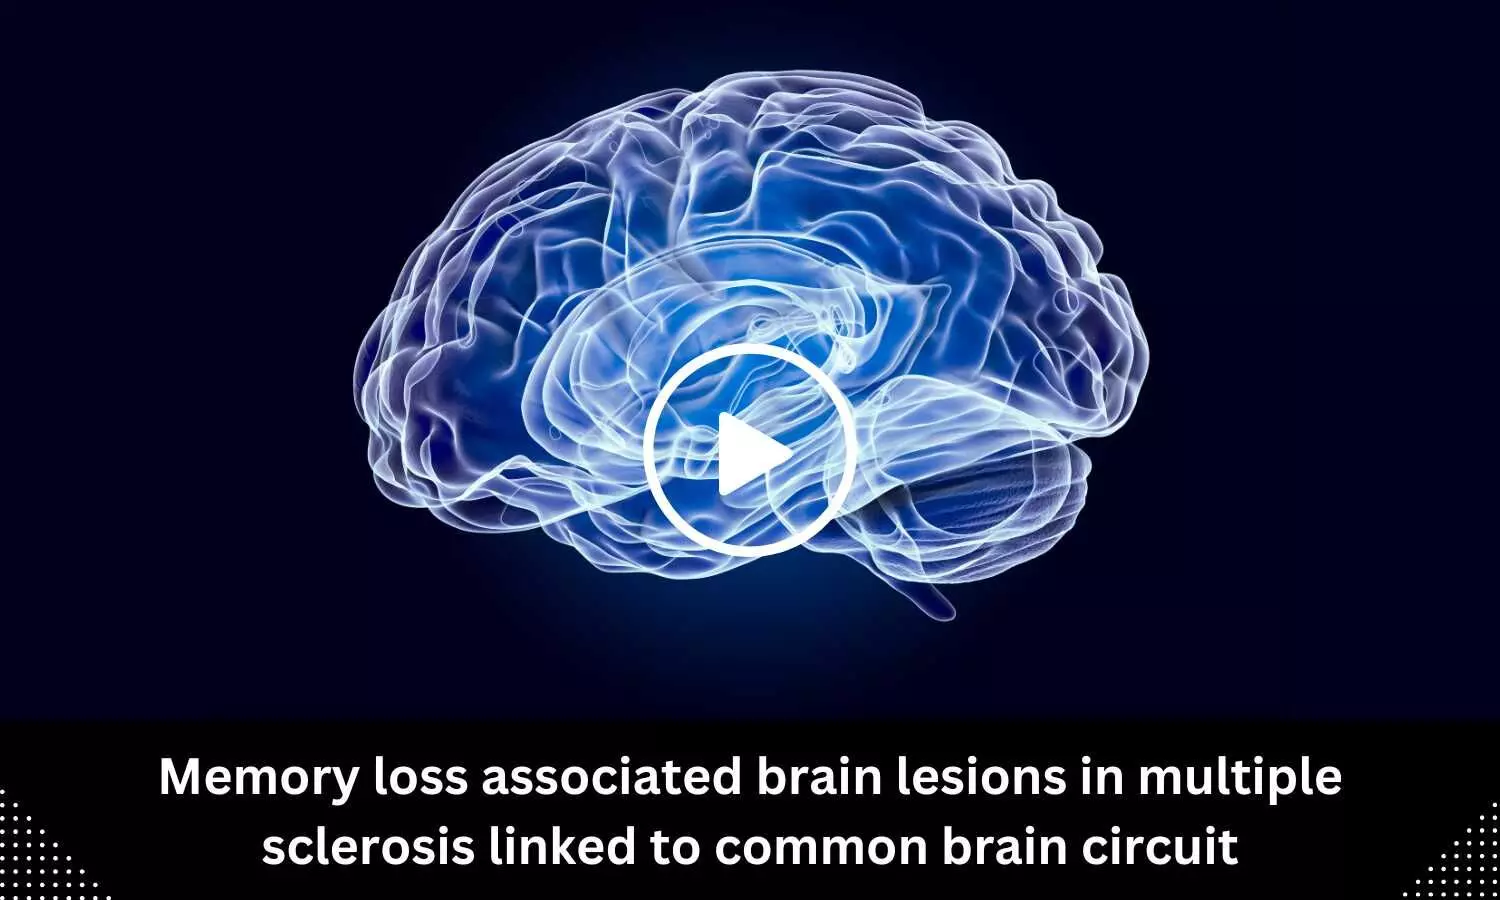 Memory loss-associated brain lesions in multiple sclerosis linked to common brain circuit